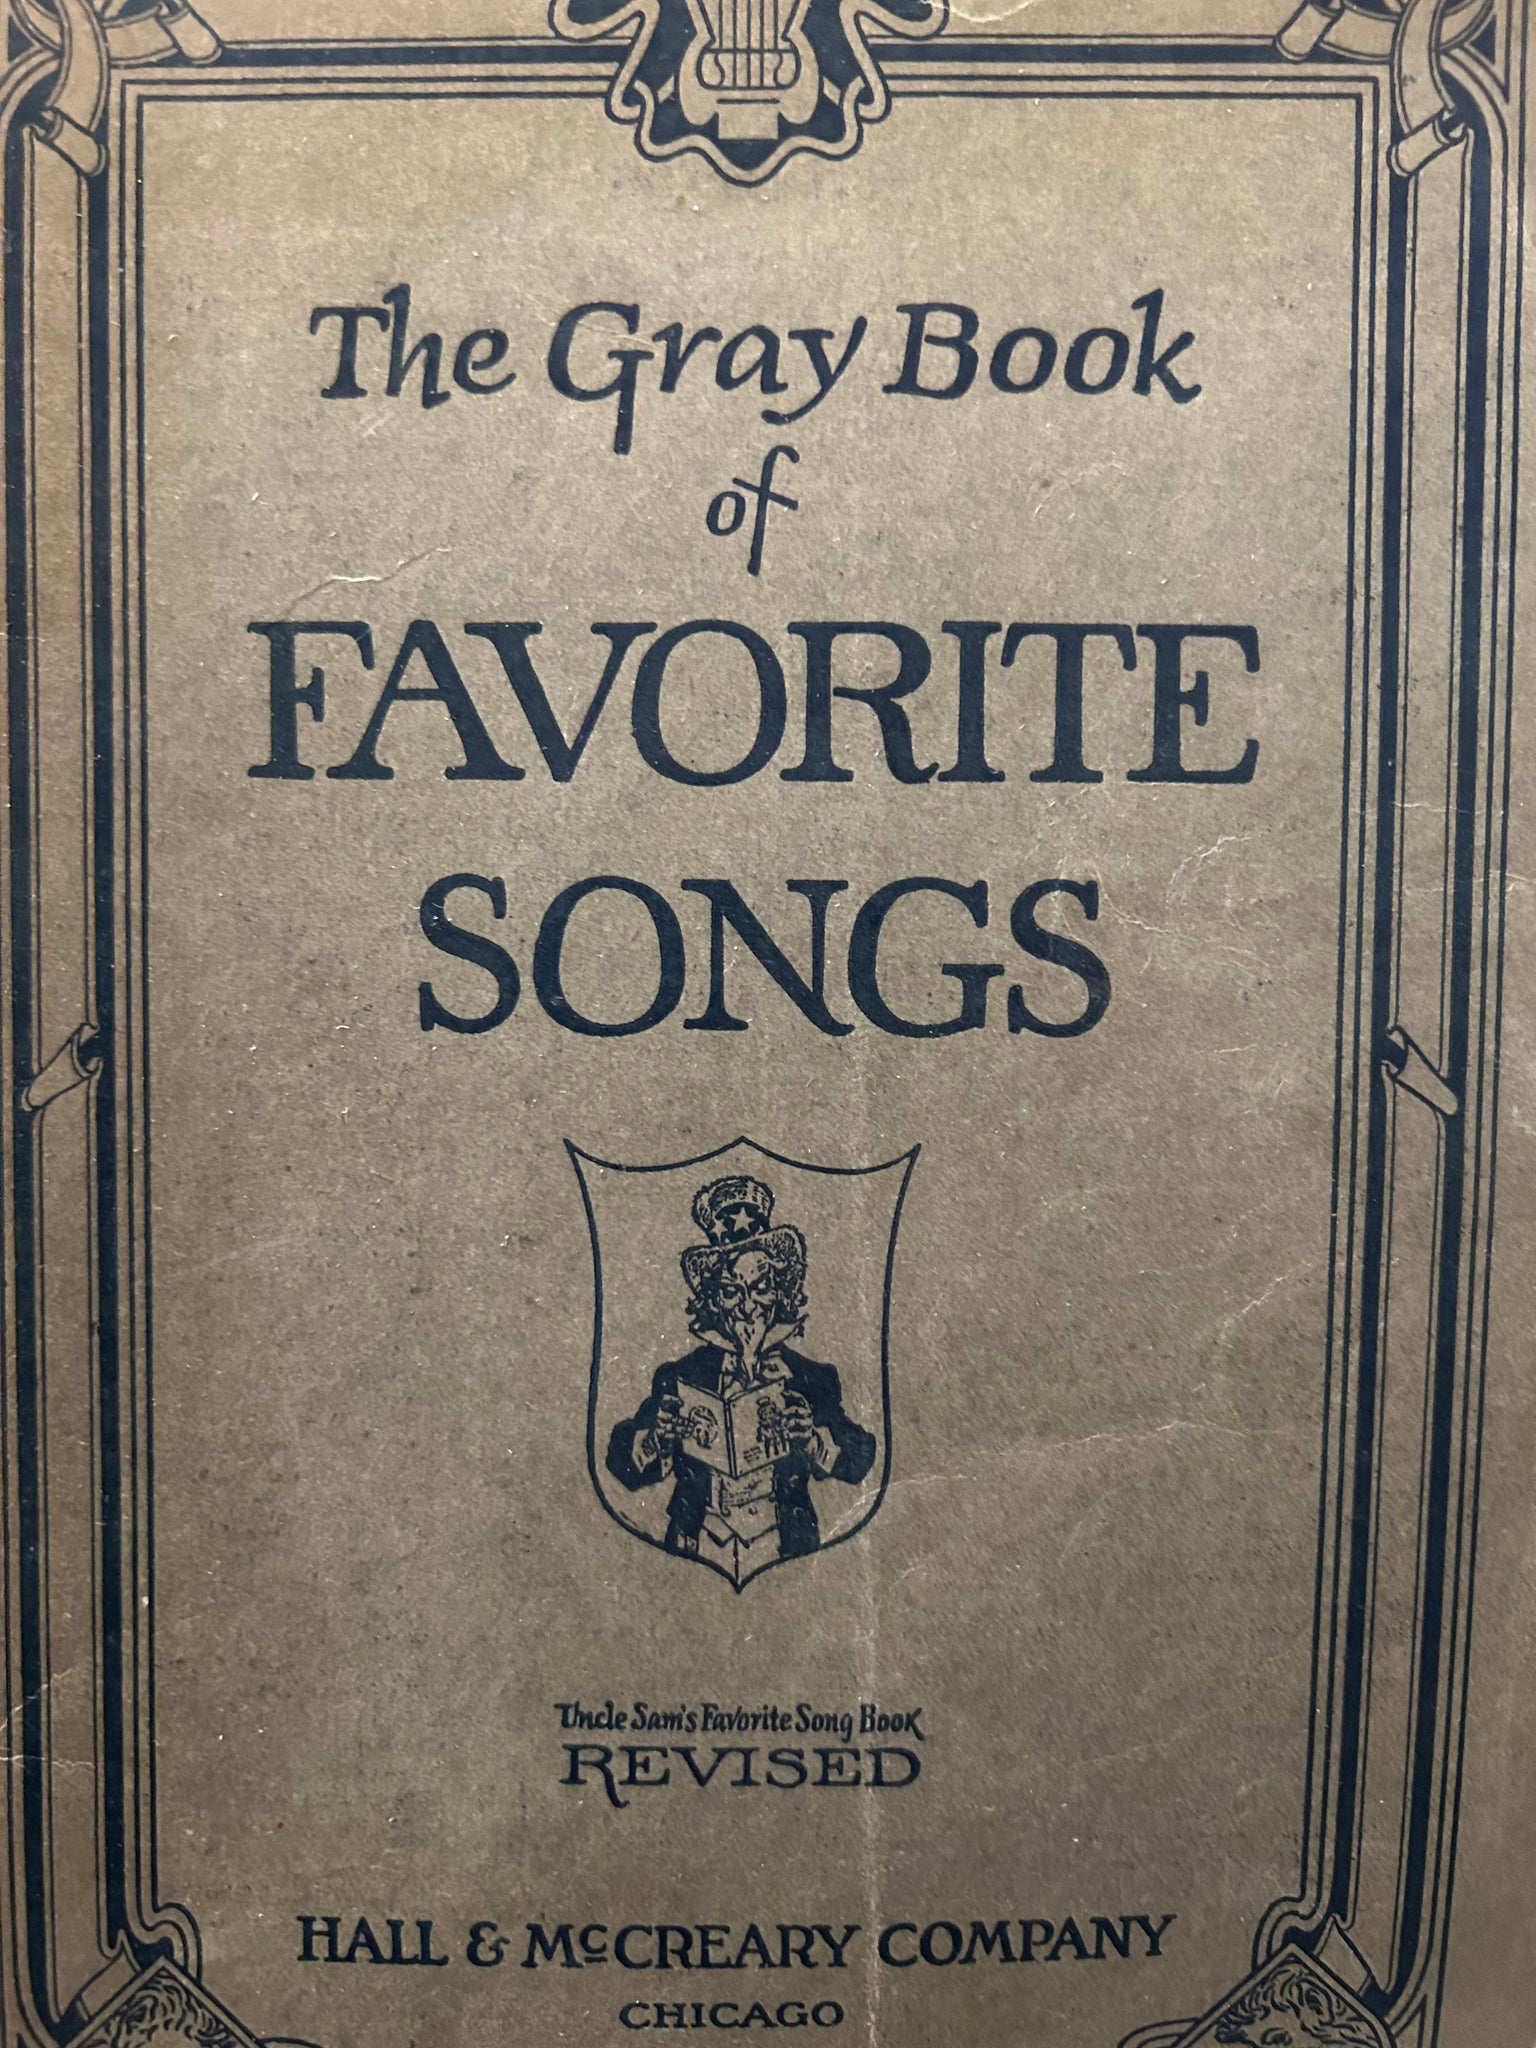 The Gray Book of Favorite Songs